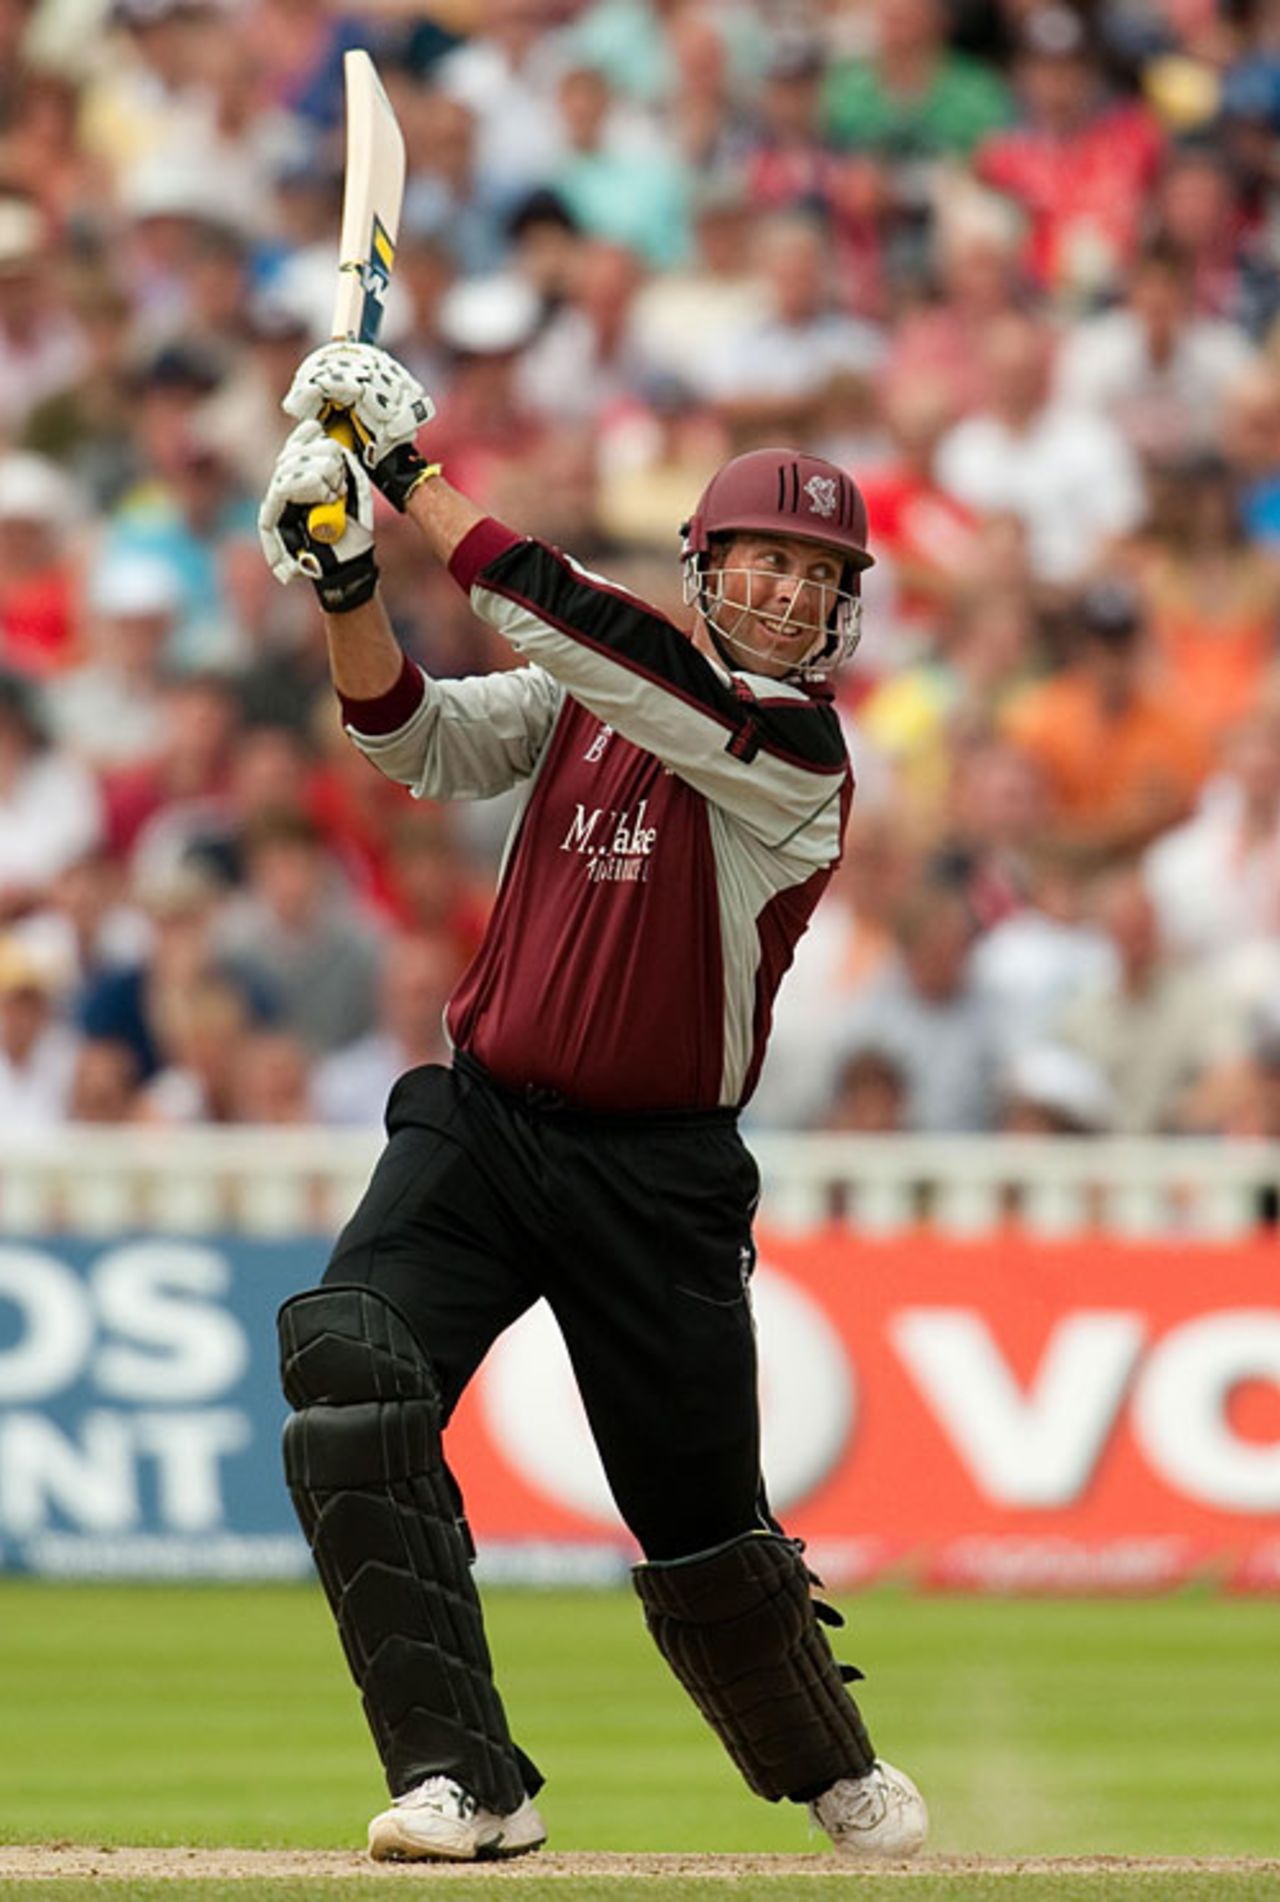 Marcus Trescothick thumps one during his entertaining 56, Kent v Somerset, Twenty20 Cup semi-final, Edgbaston, August 15, 2009